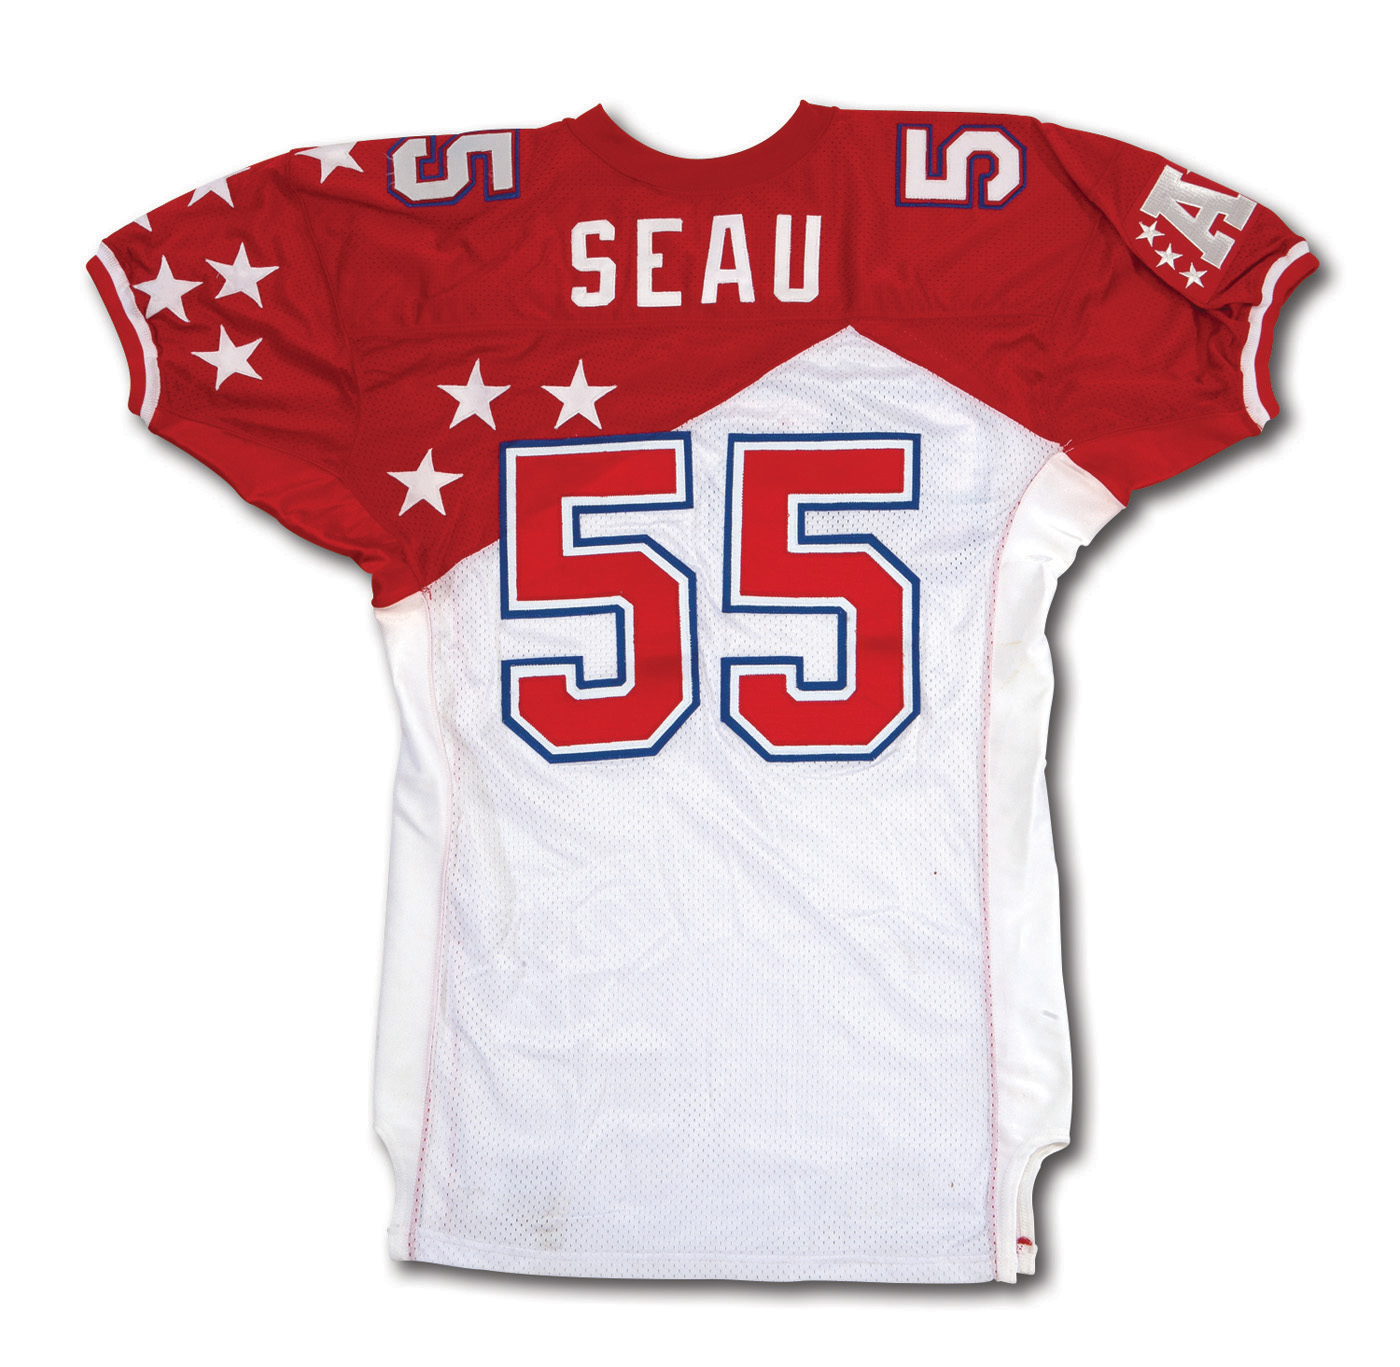 Pro Bowl In Game Used Nfl Jerseys for sale